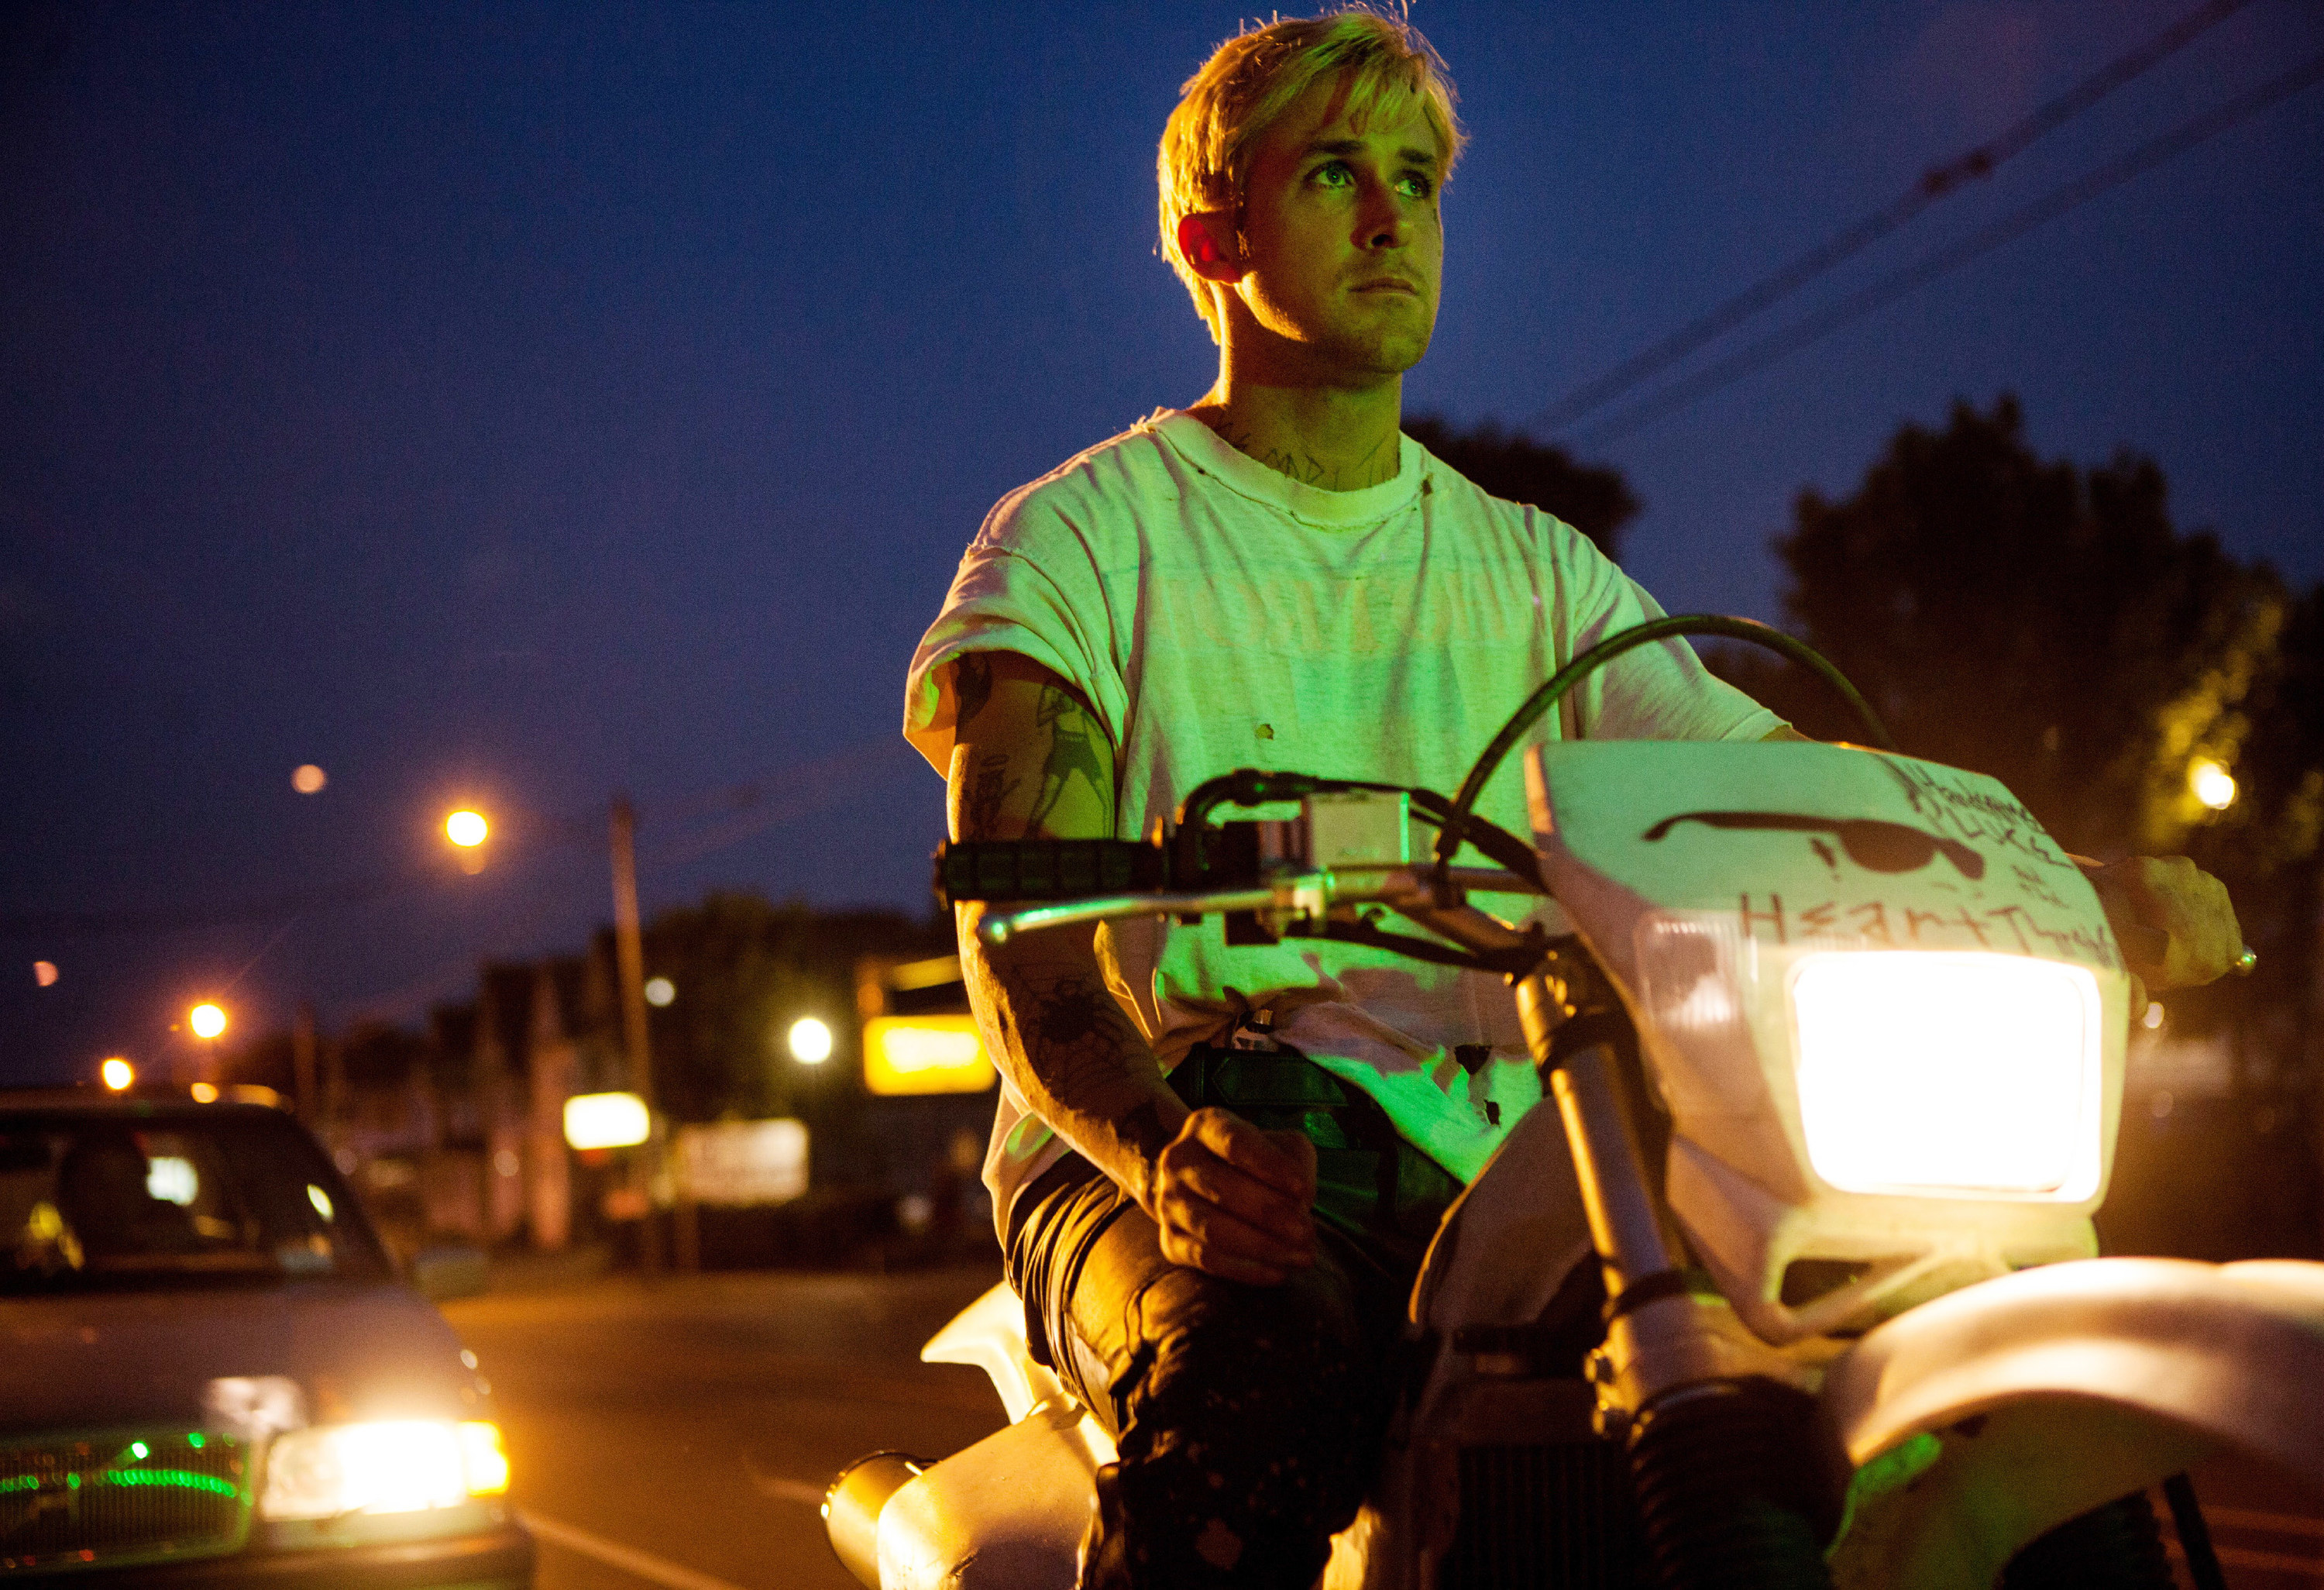 Ryan Gosling&#x27;s character rides a motorcycle